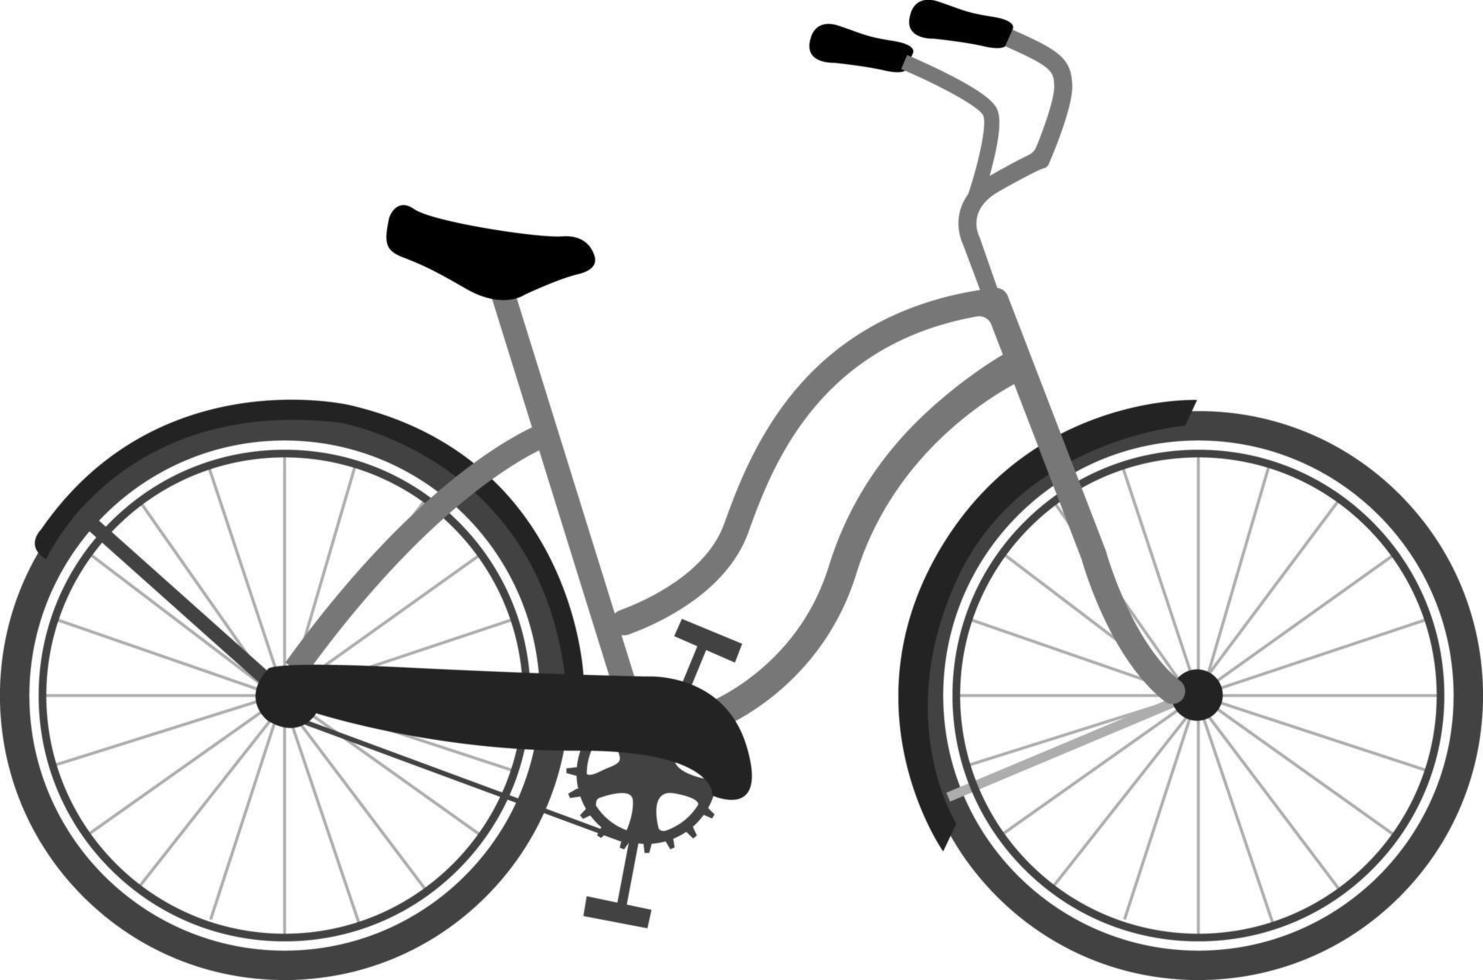 Grey bicycle, illustration, vector on white background